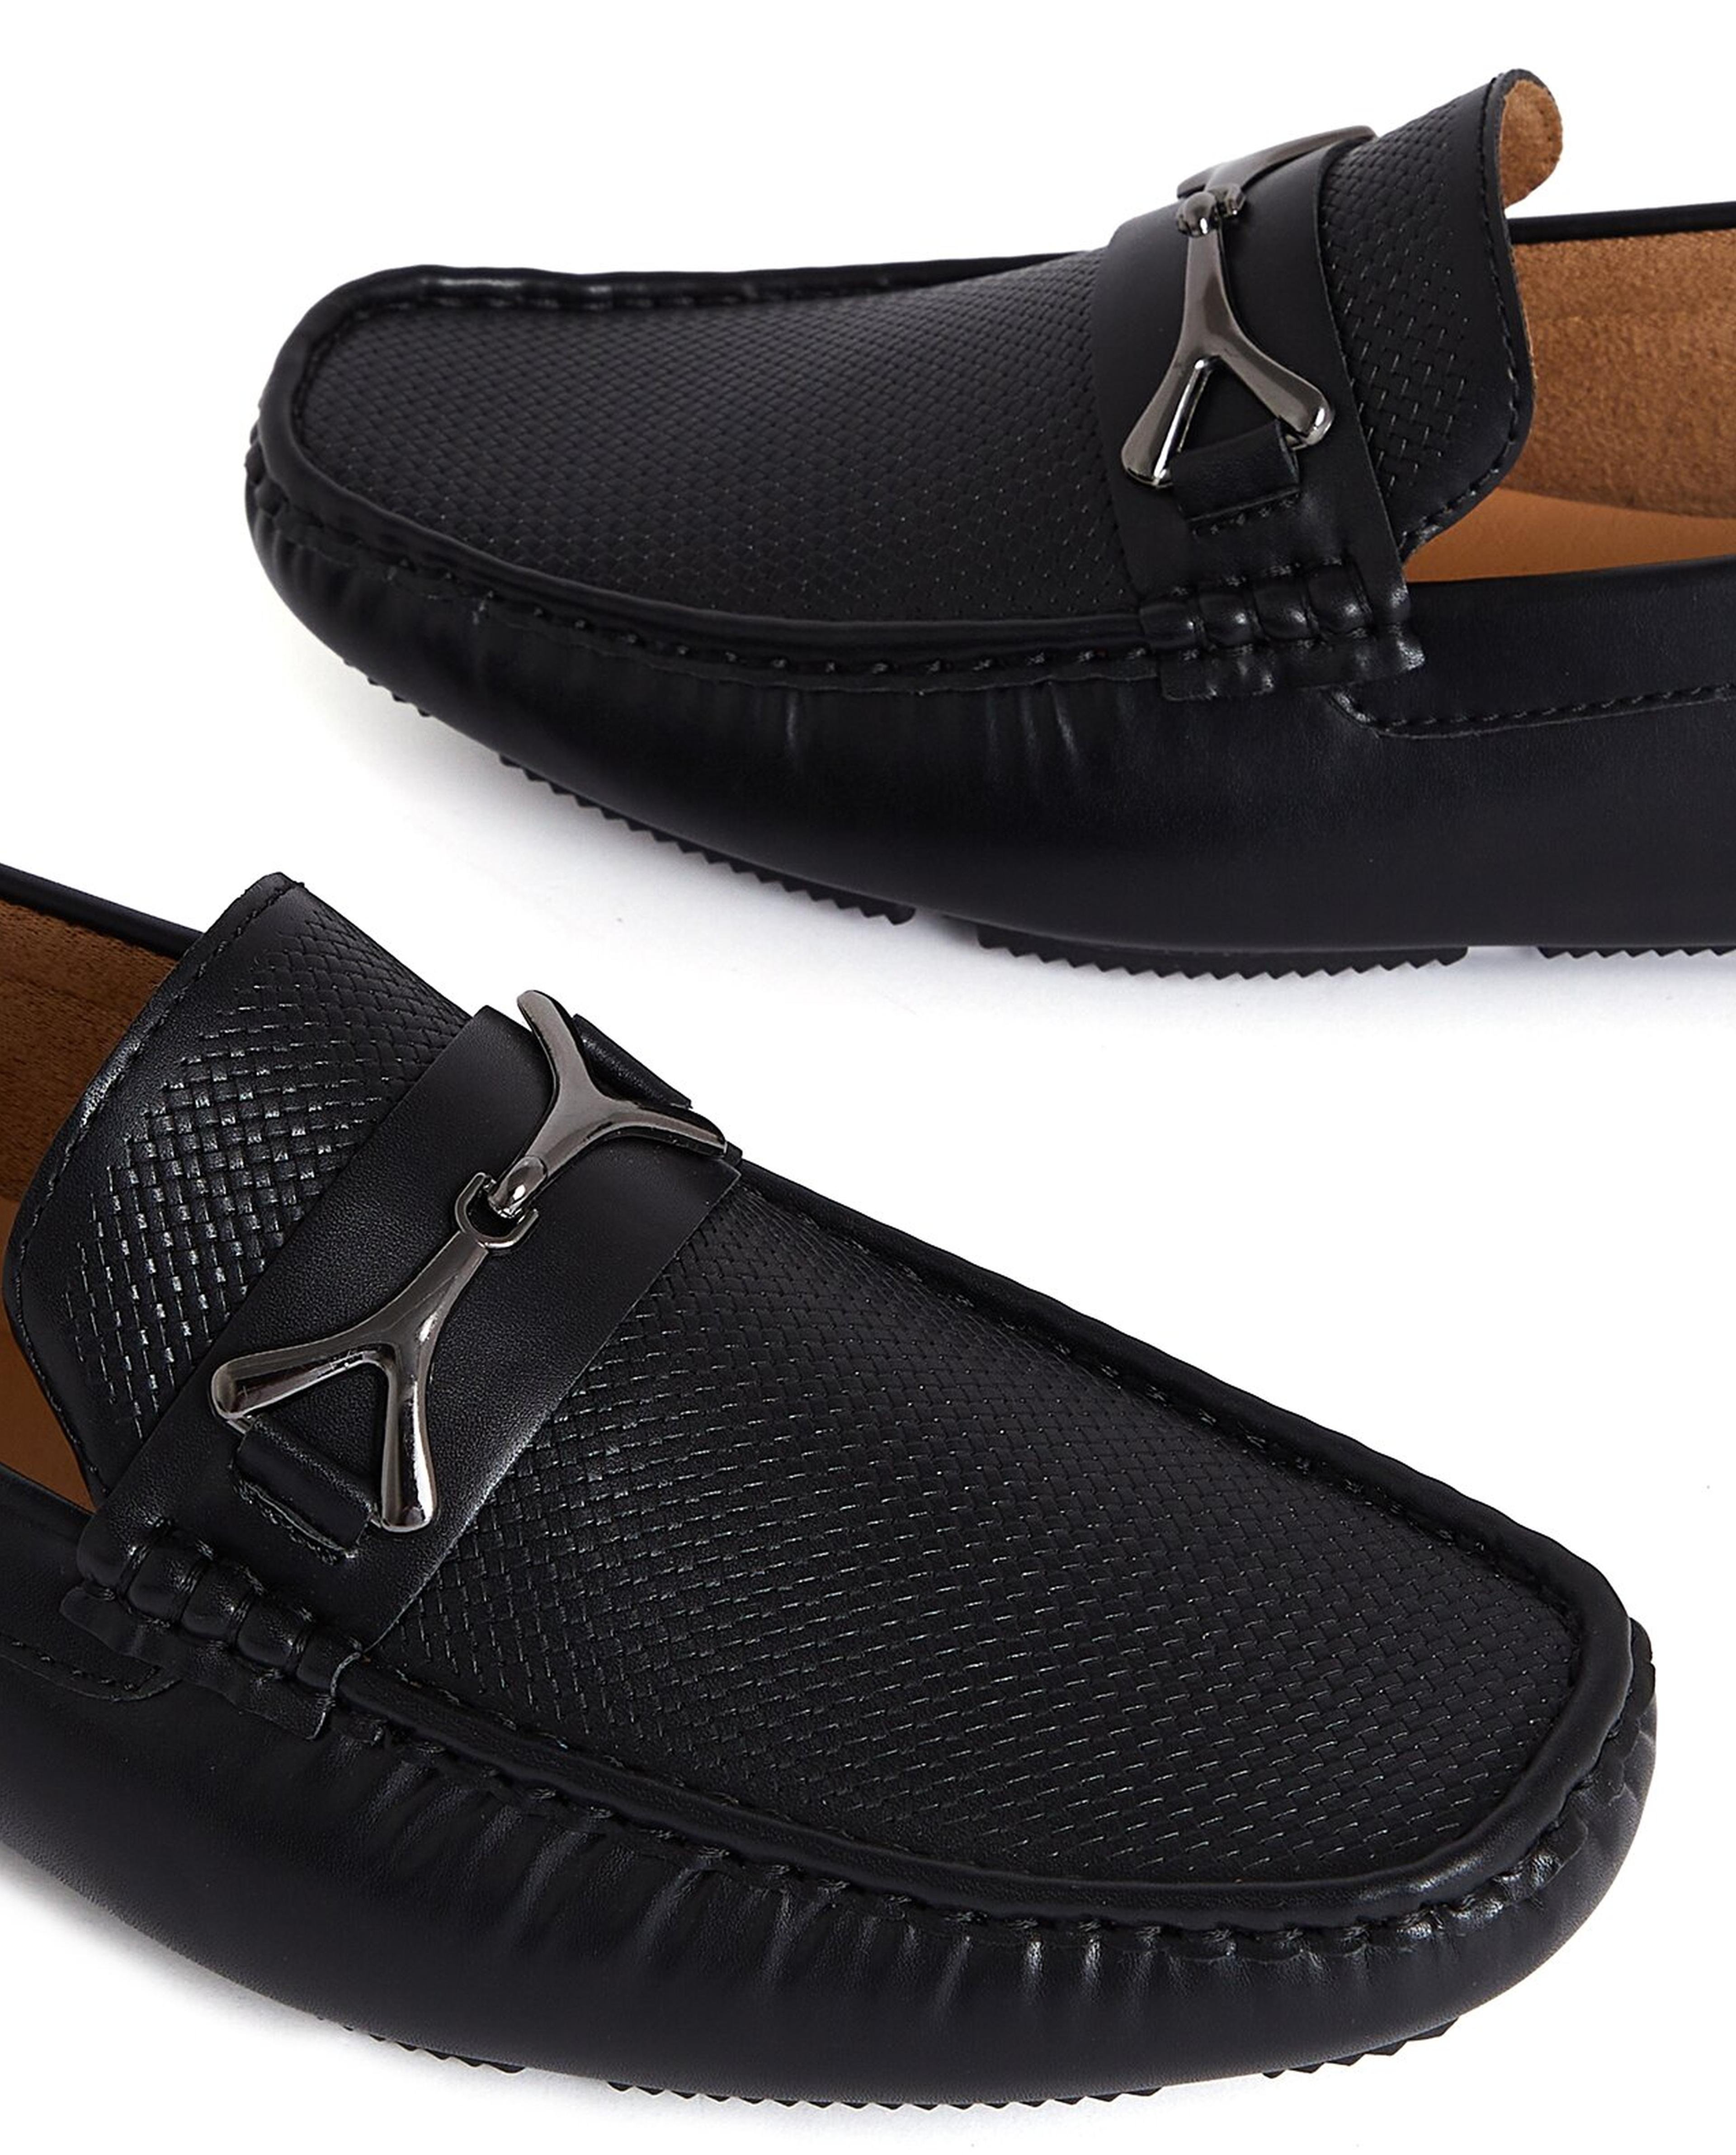 Accessory Detail Loafers